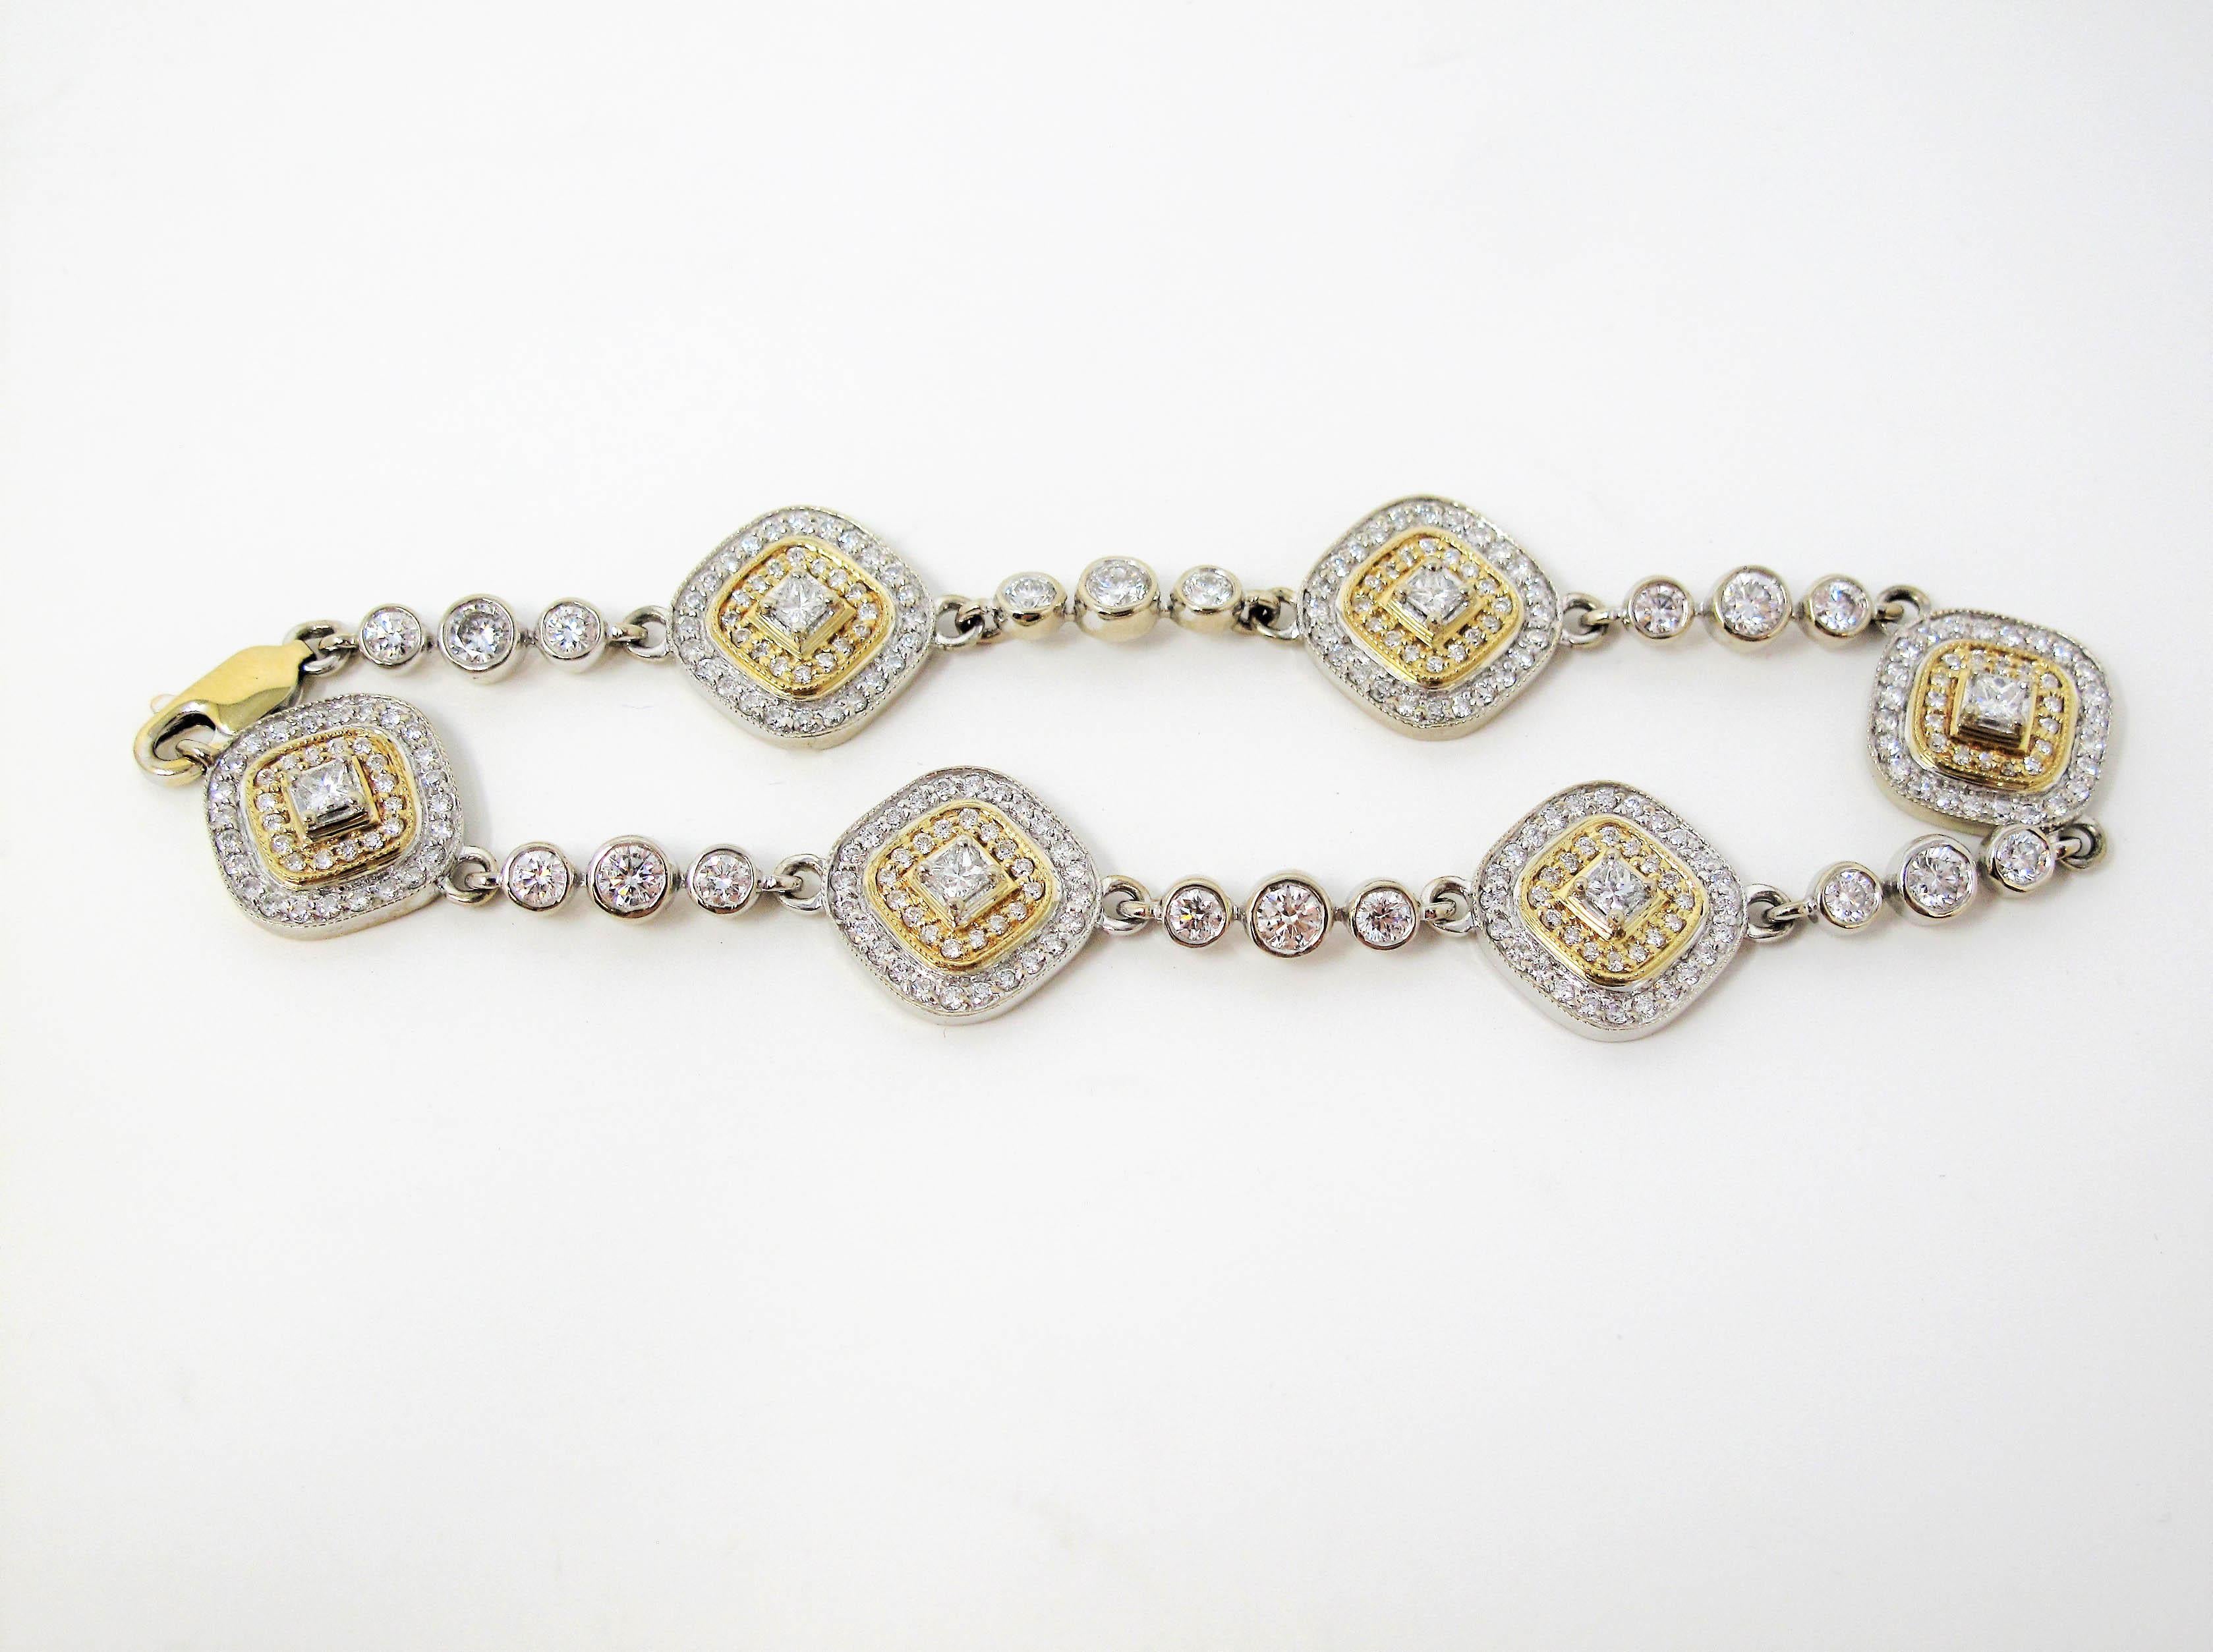 This incredible glittering two-tone station bracelet boasts an ultra feminine, modern design with serious sparkle. The dazzling bracelet sits delicately on the wrist and offers an understated elegance with its unique double pave diamond halo station